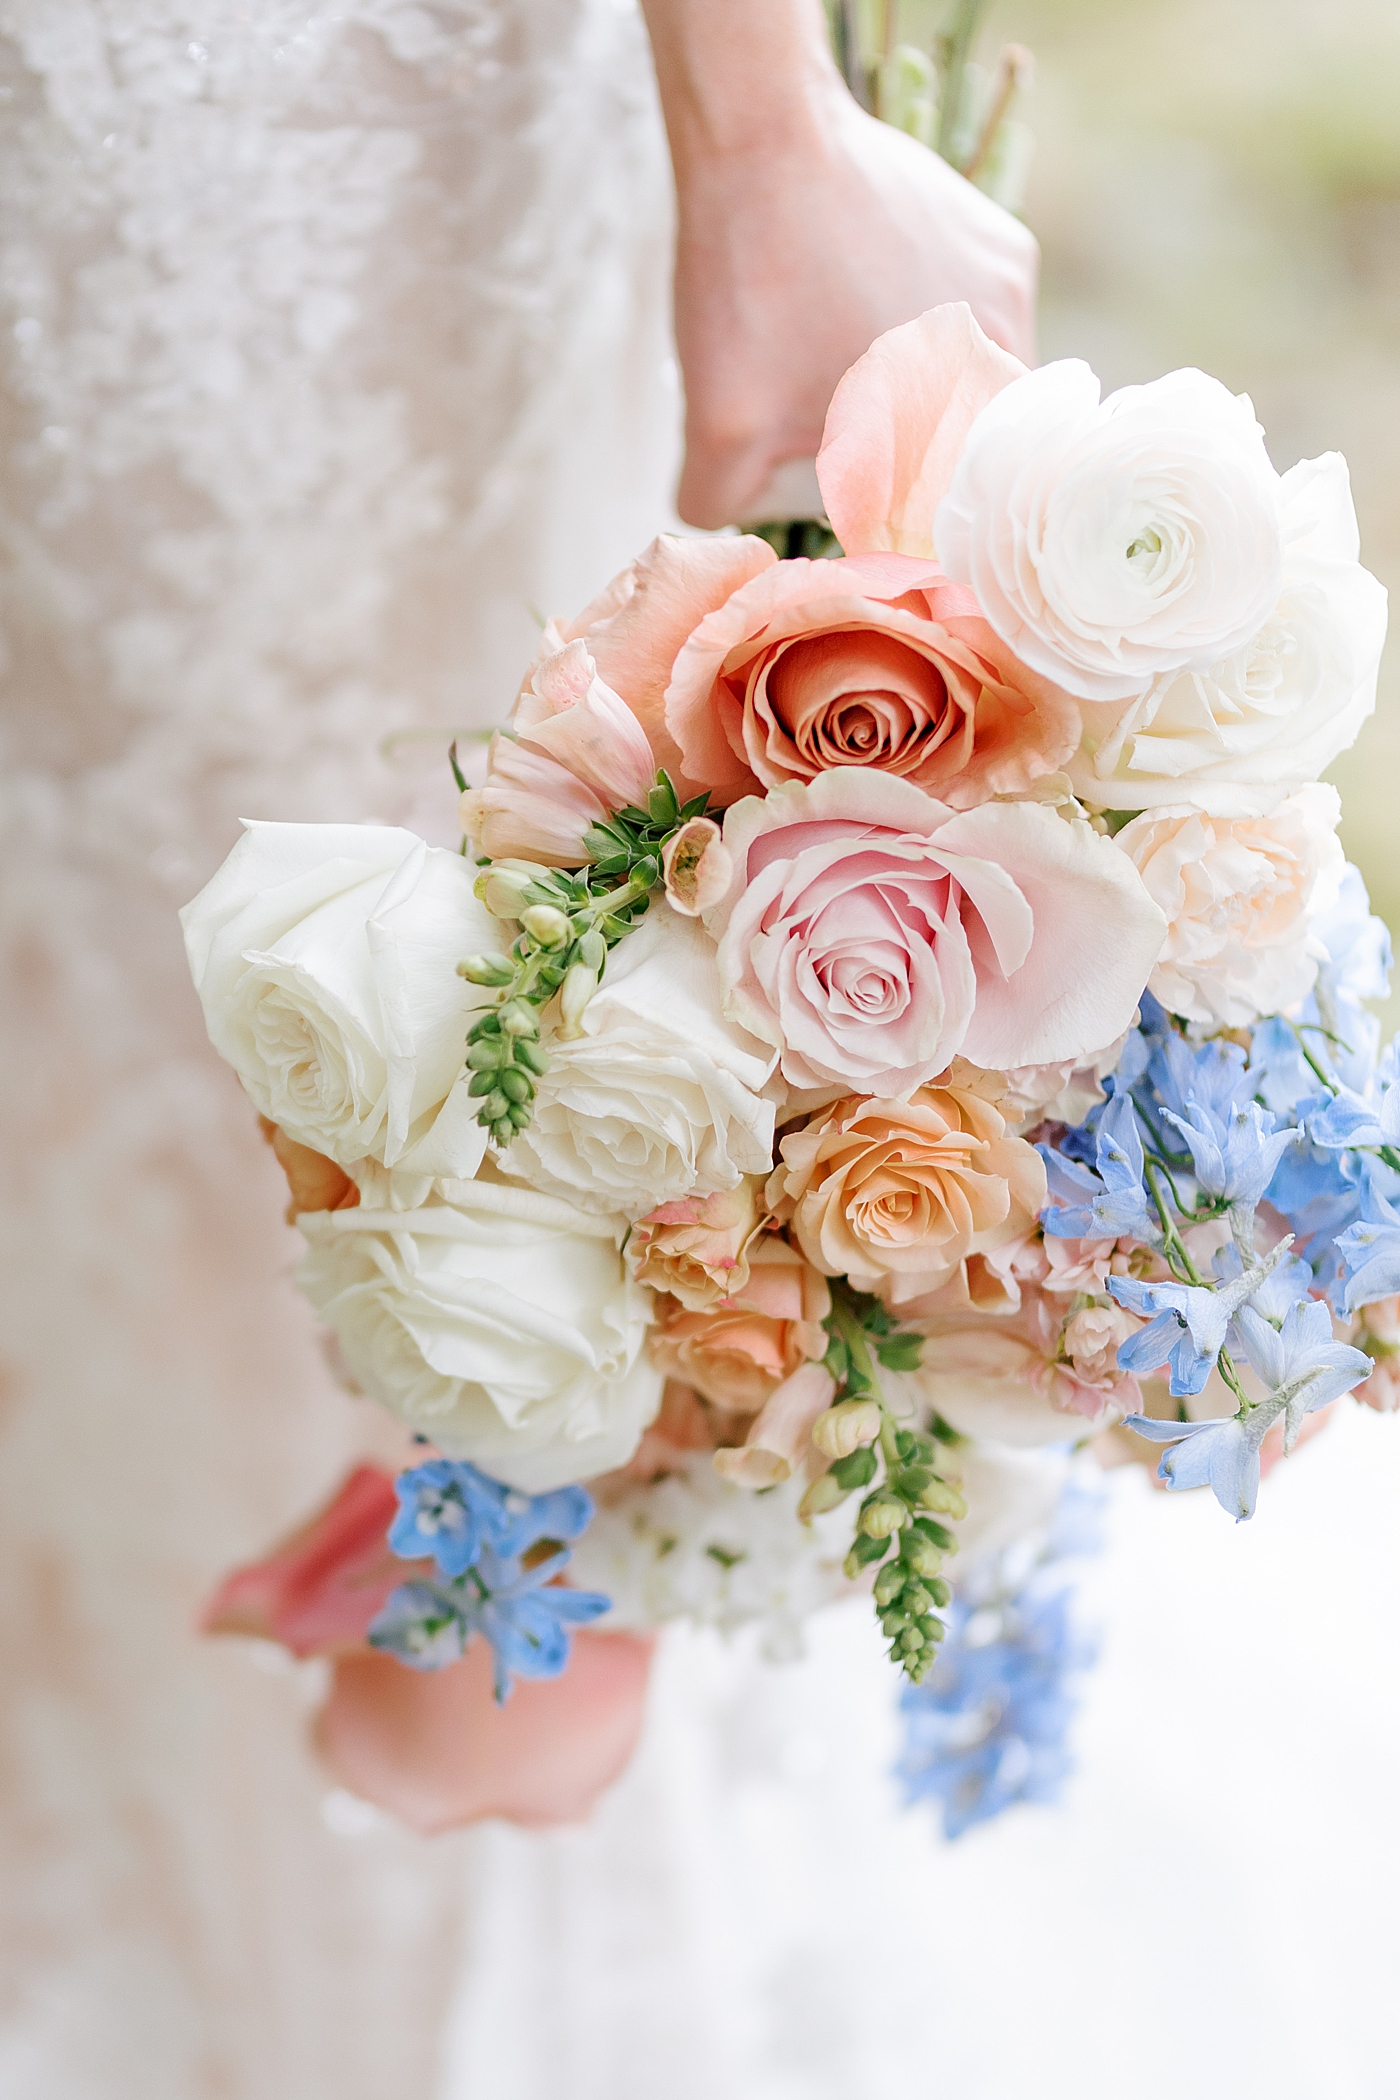 Detail of bride's hand holding her bouquet | Image by Hope Helmuth Photography 